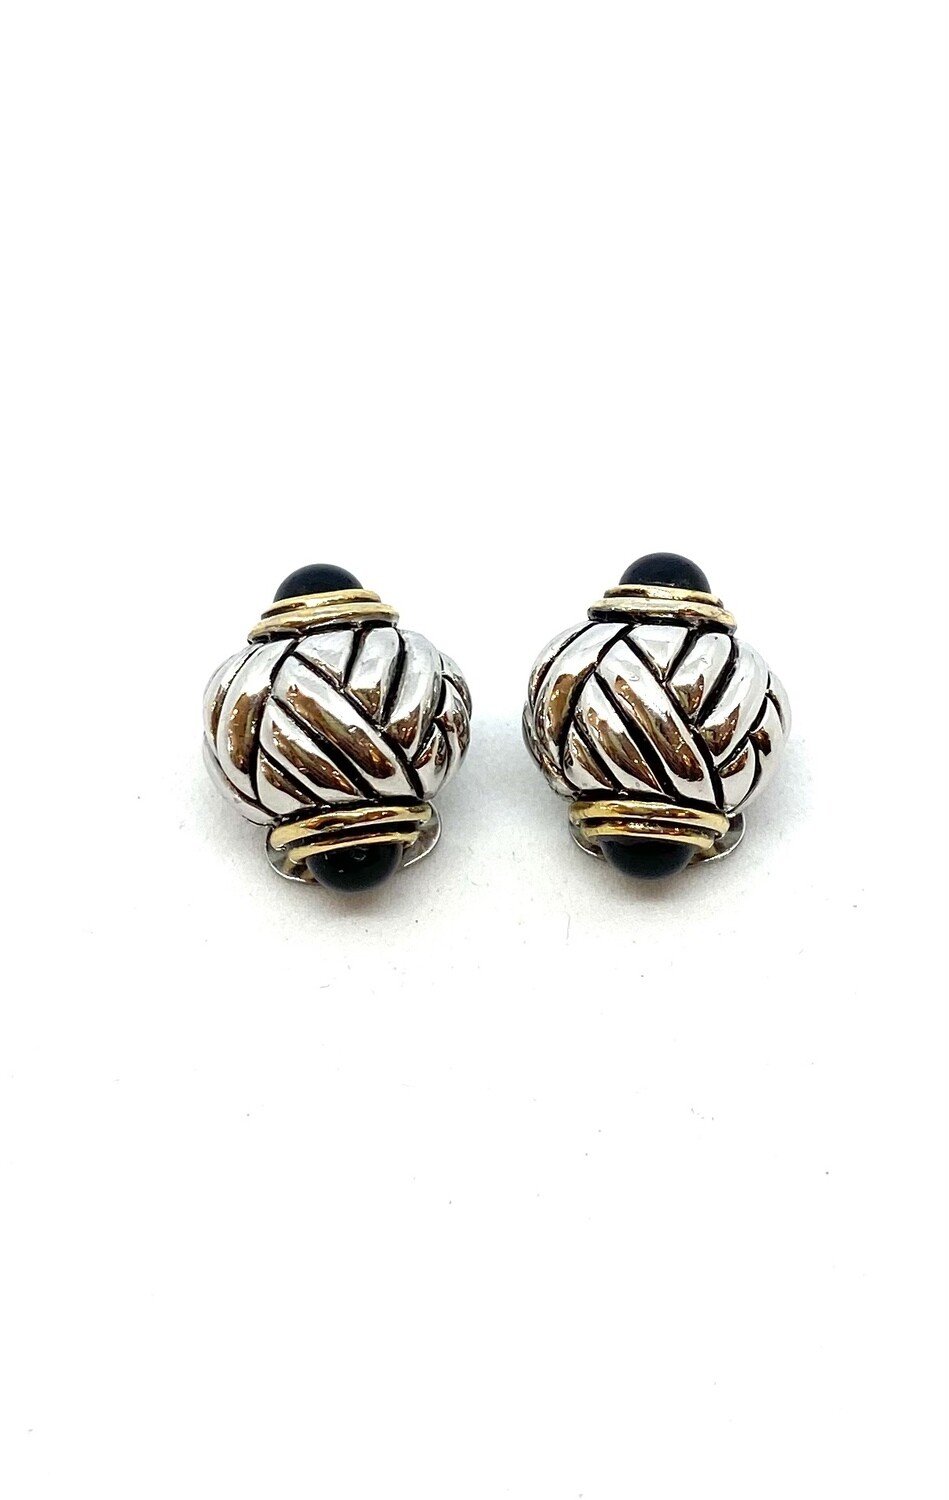 Black Gold and Silver Clip-On Earrings